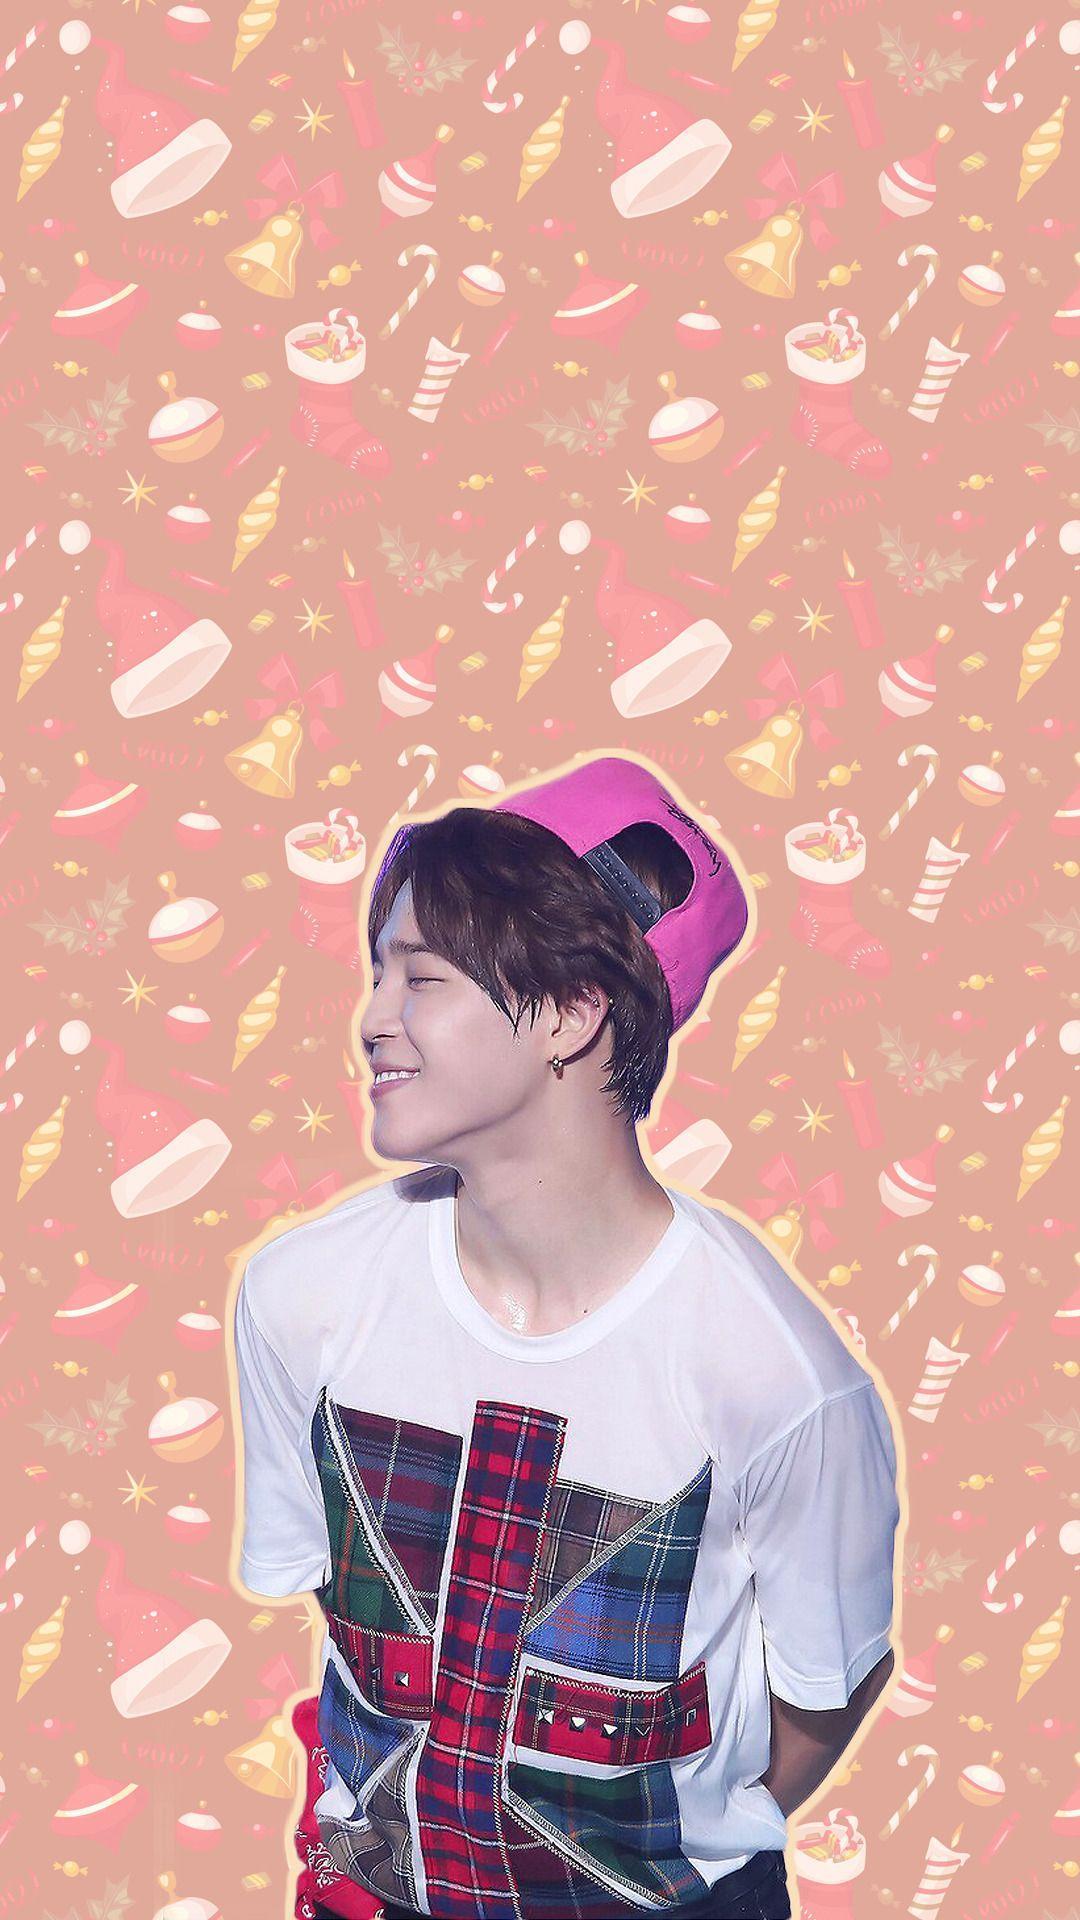 ✧・ﾟ *✧・ﾟ* JIMIN CHRISTMAS WALLPAPERS px please